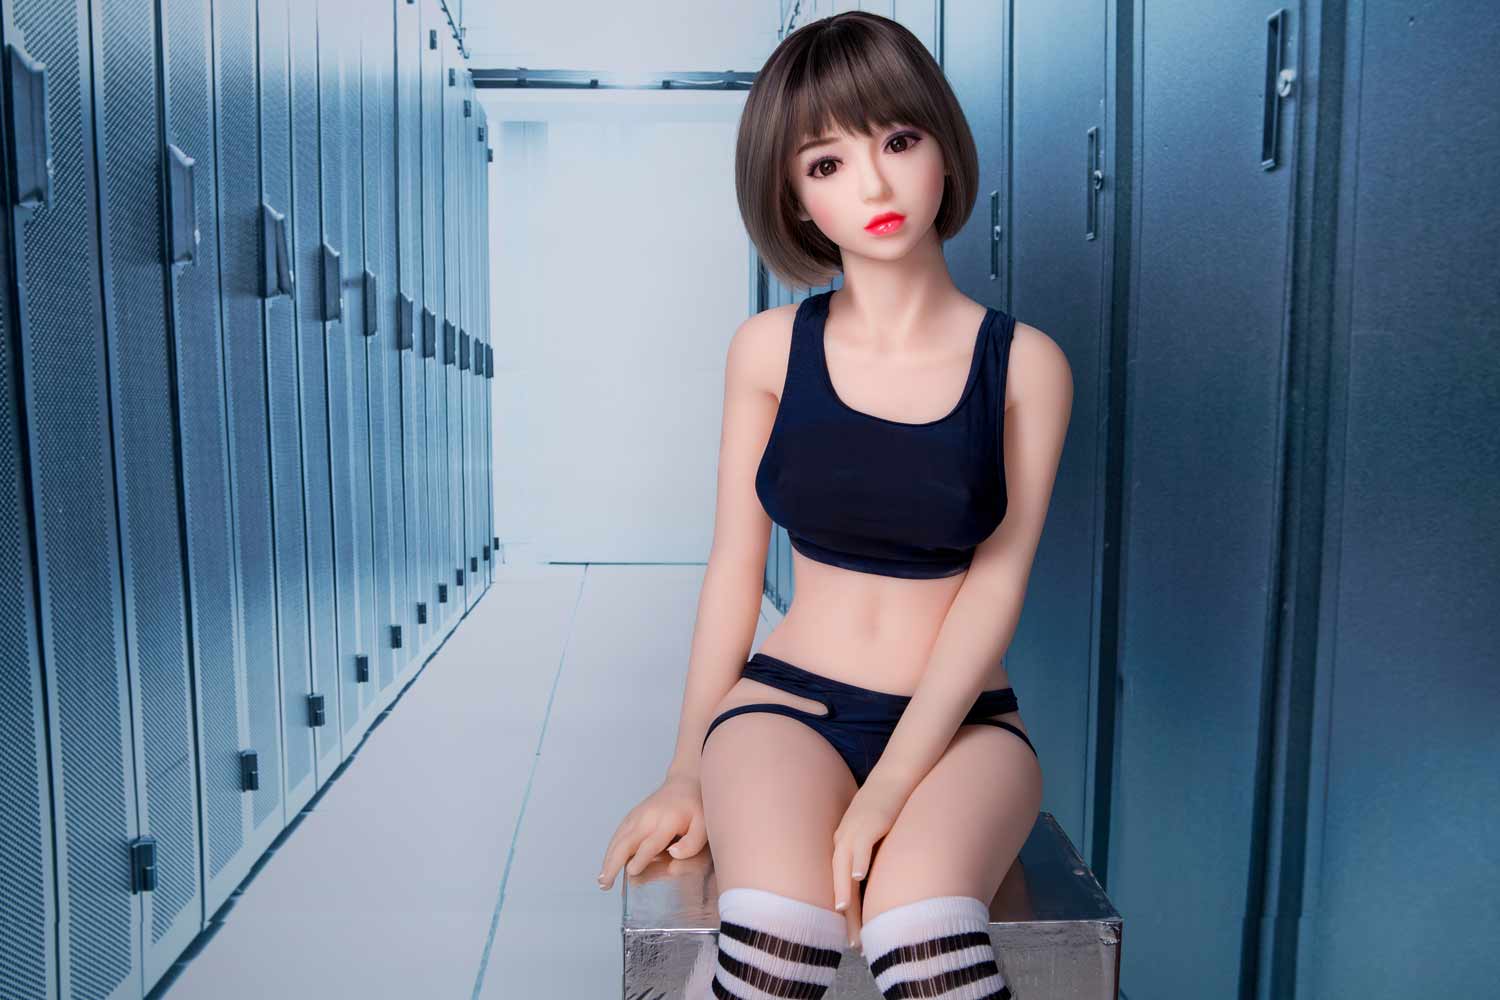 Sex doll with legs and hands